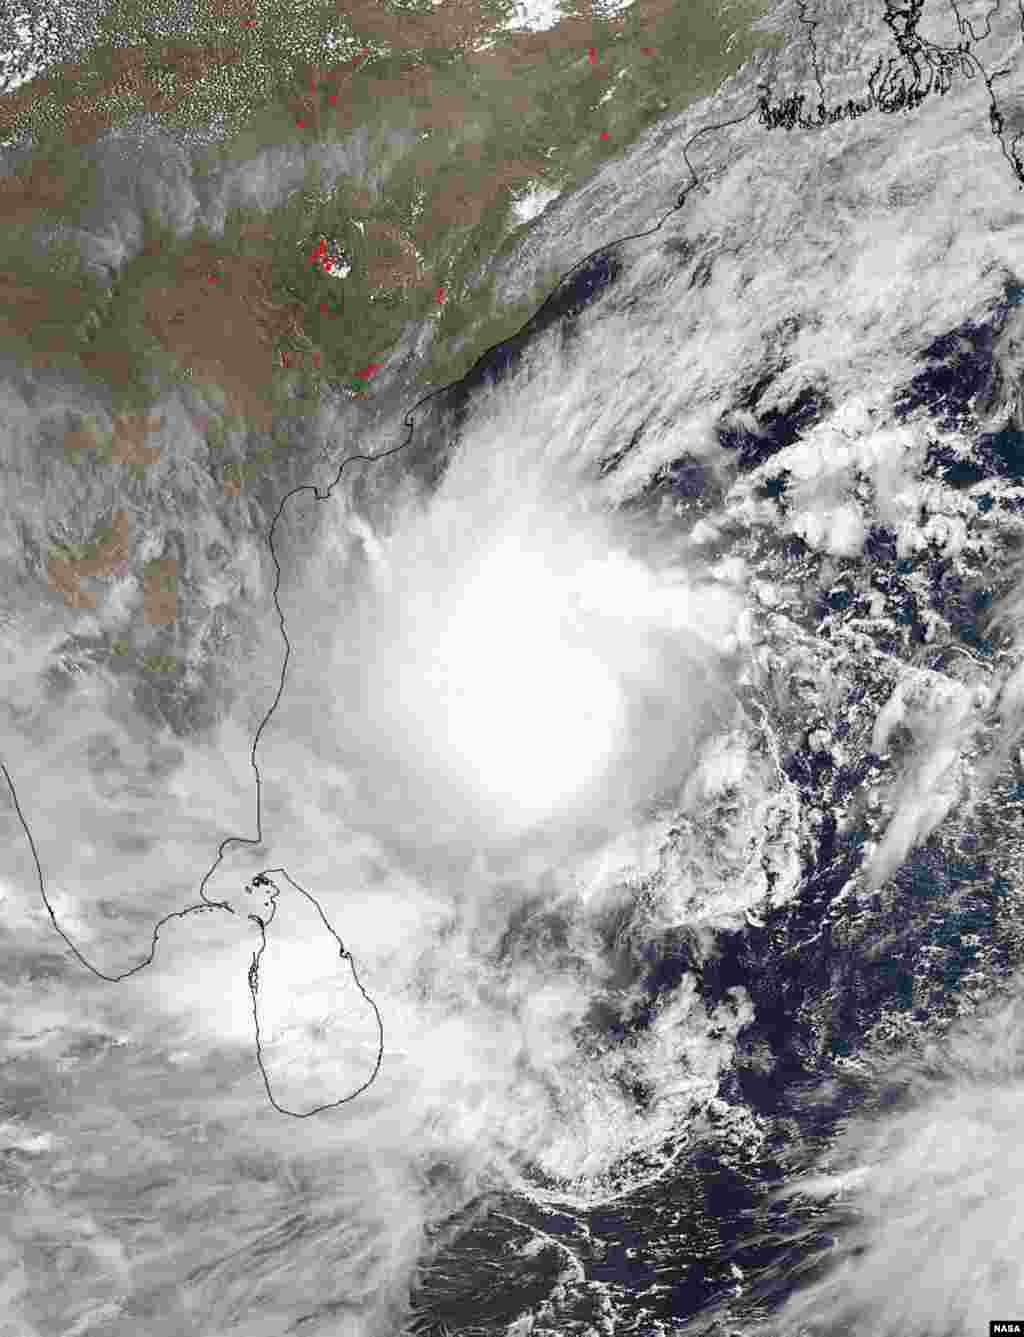 NASA&rsquo;s Aqua satellite captured this visible image of a well-rounded Tropical Cyclone Mahasen in the Northern Indian Ocean on May 15 at 07:55 UTC. (Credit: NASA Goddard MODIS Rapid Response Team)